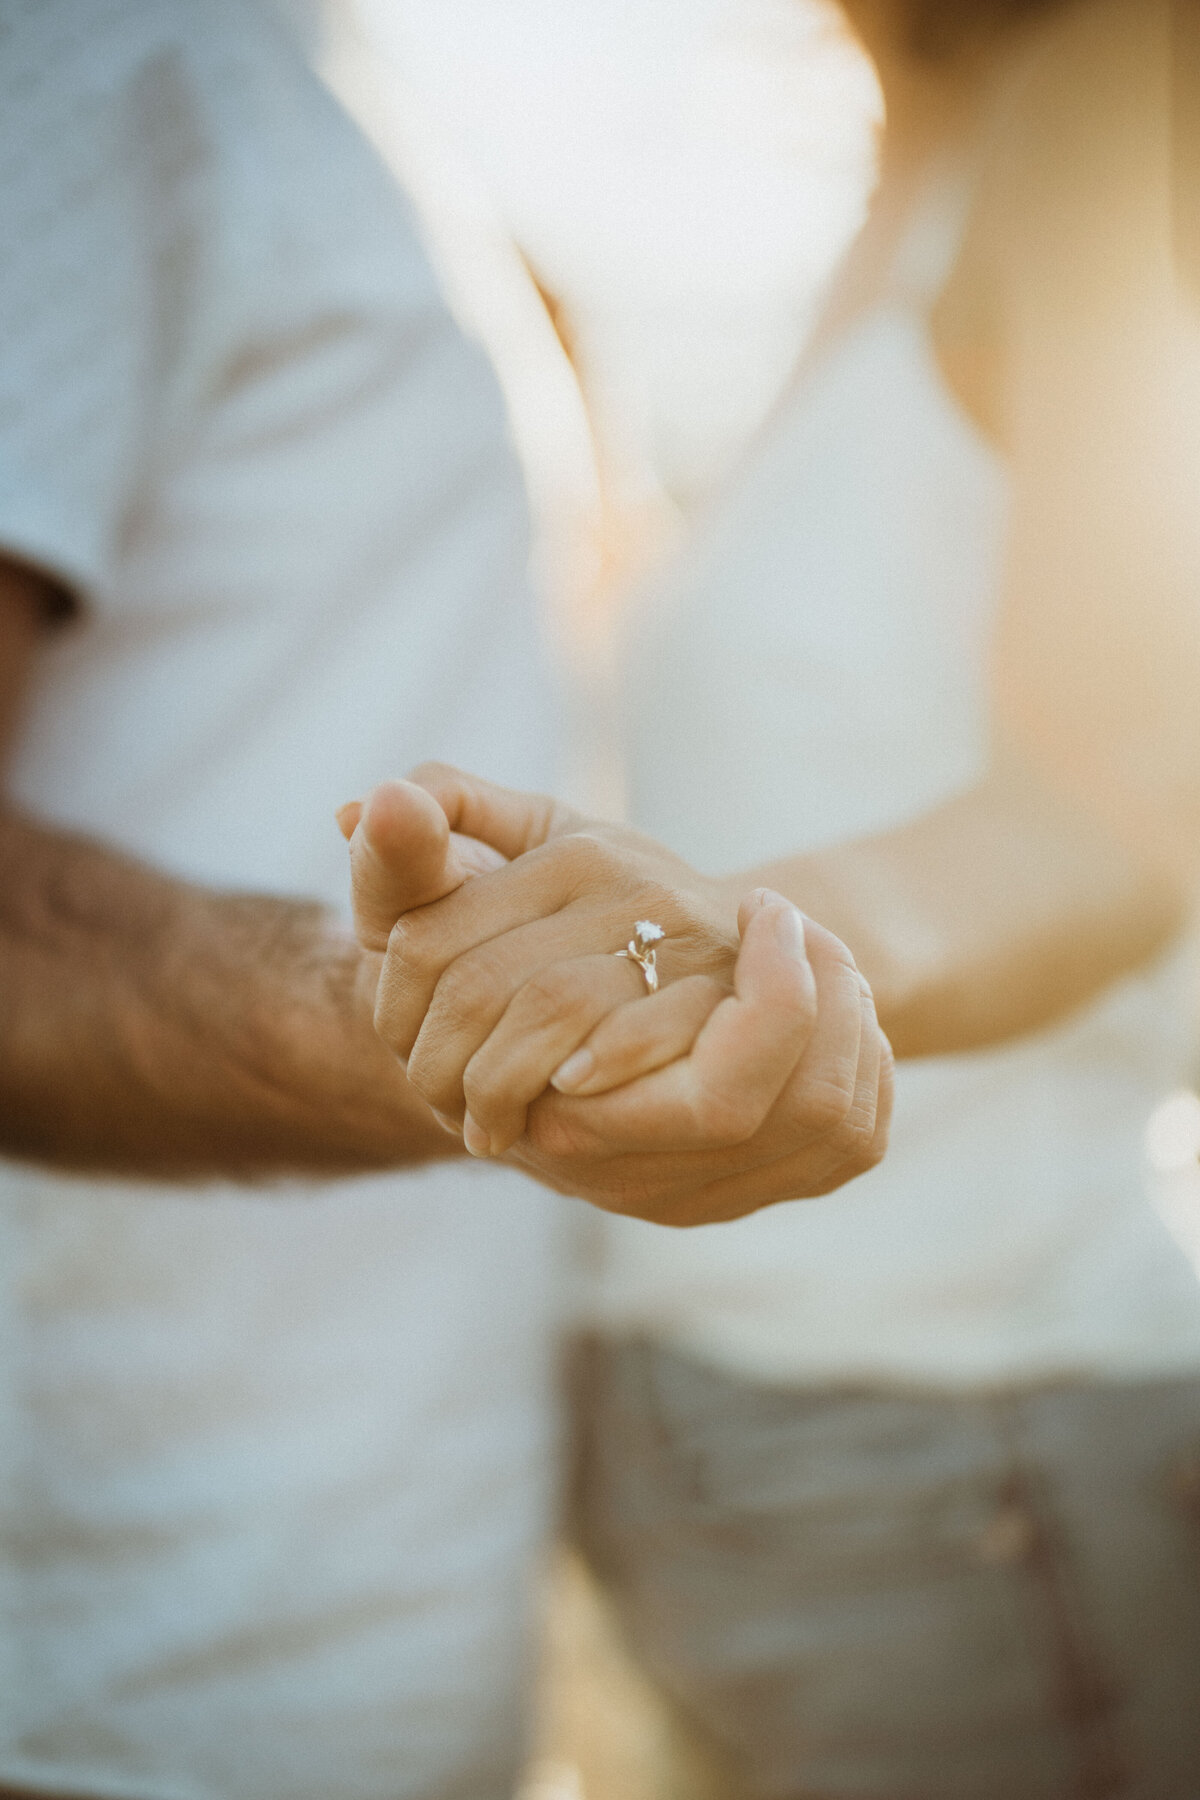 Close up photo of couple holding hands and engagement ring